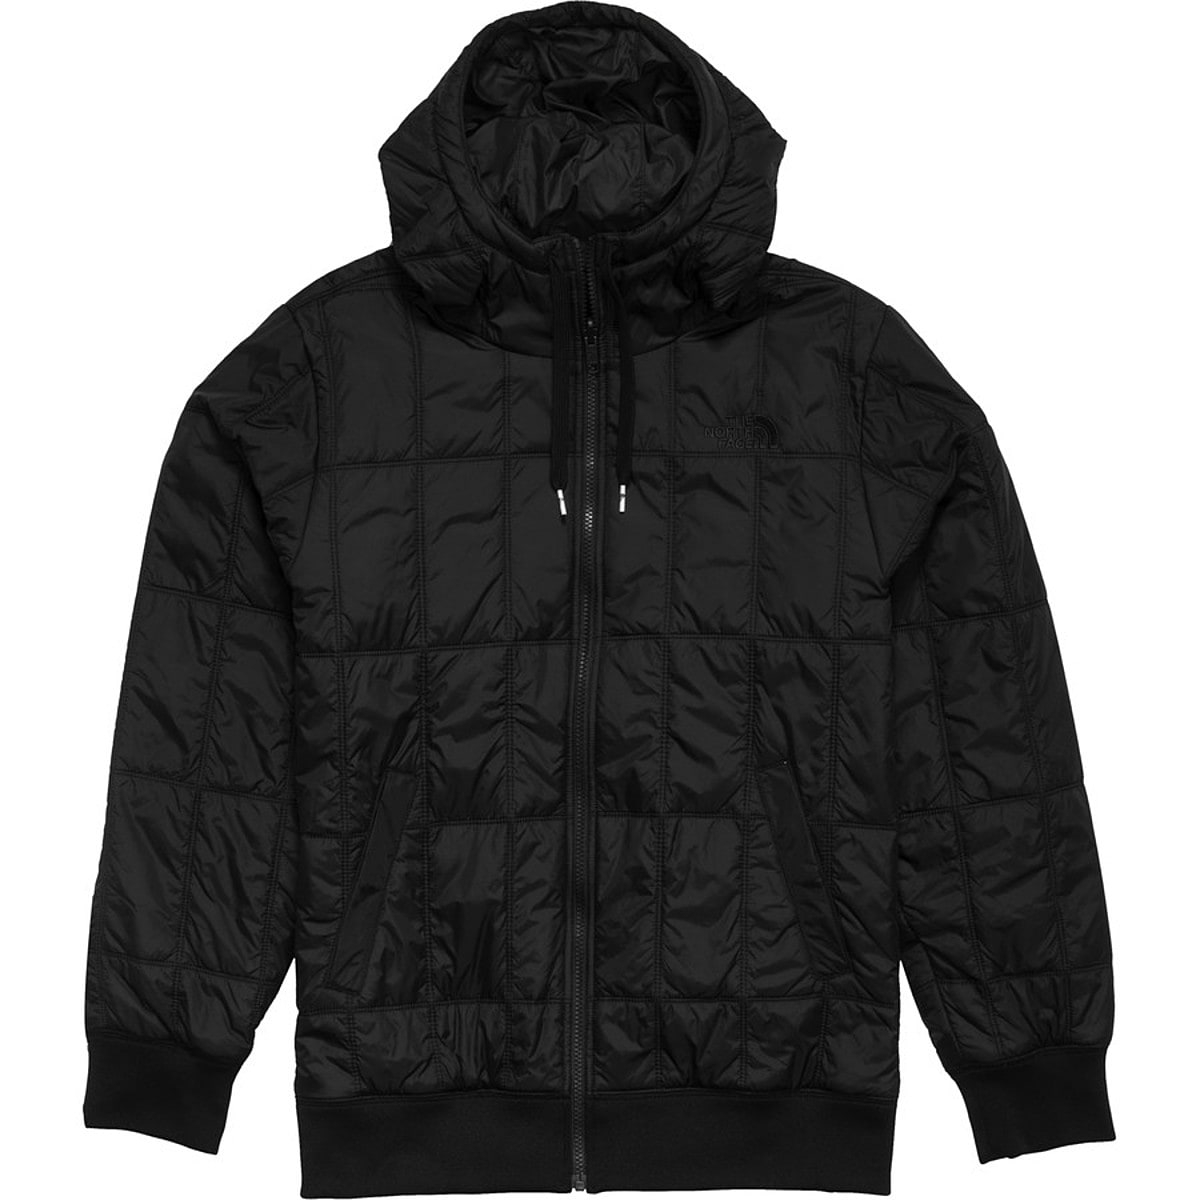 The North Face Boss Bomber Jacket - Trailspace.com